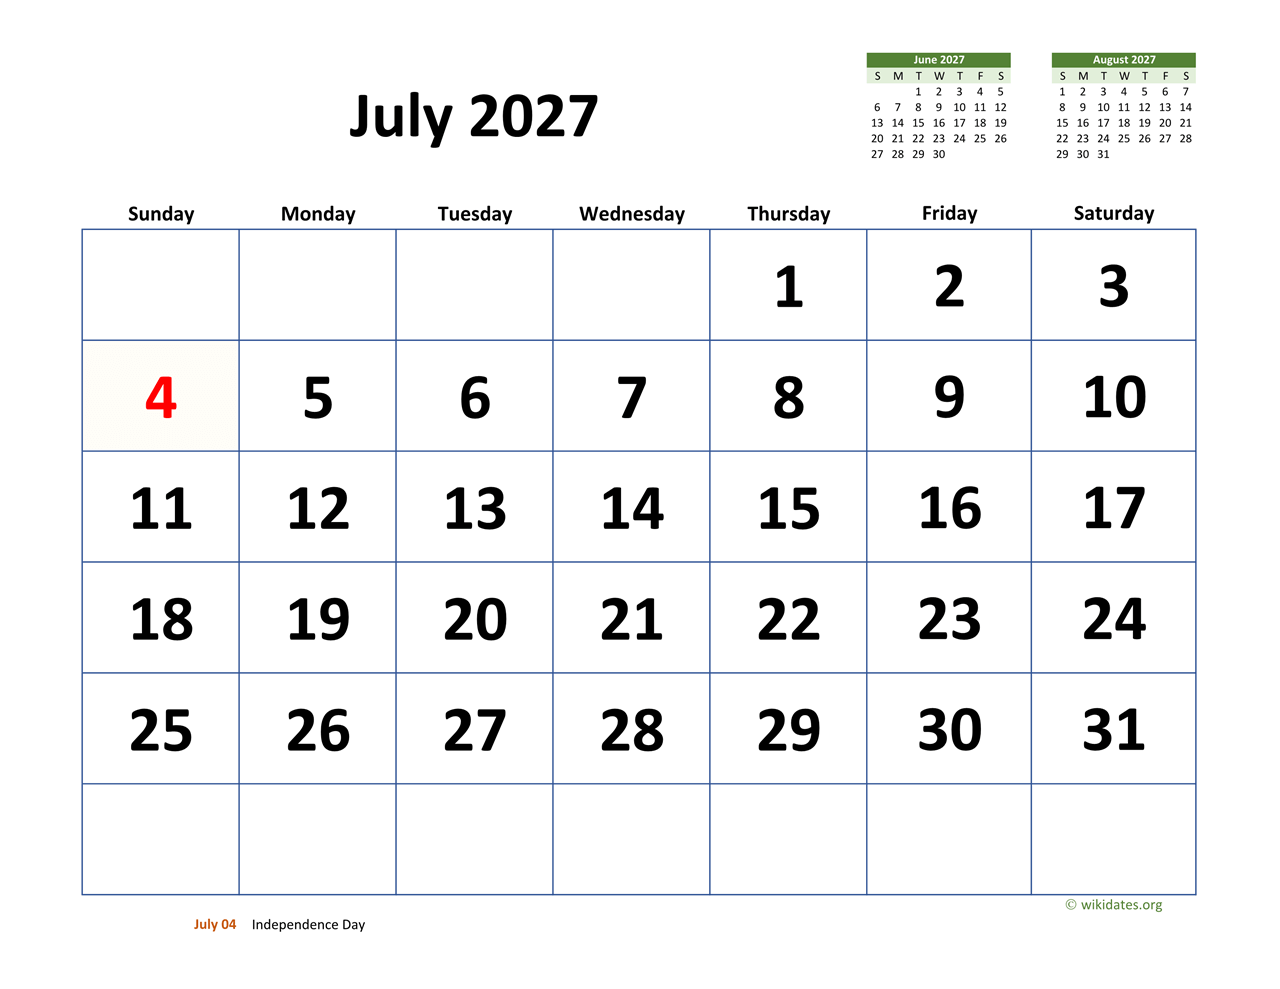 July 2027 Calendar with Extralarge Dates